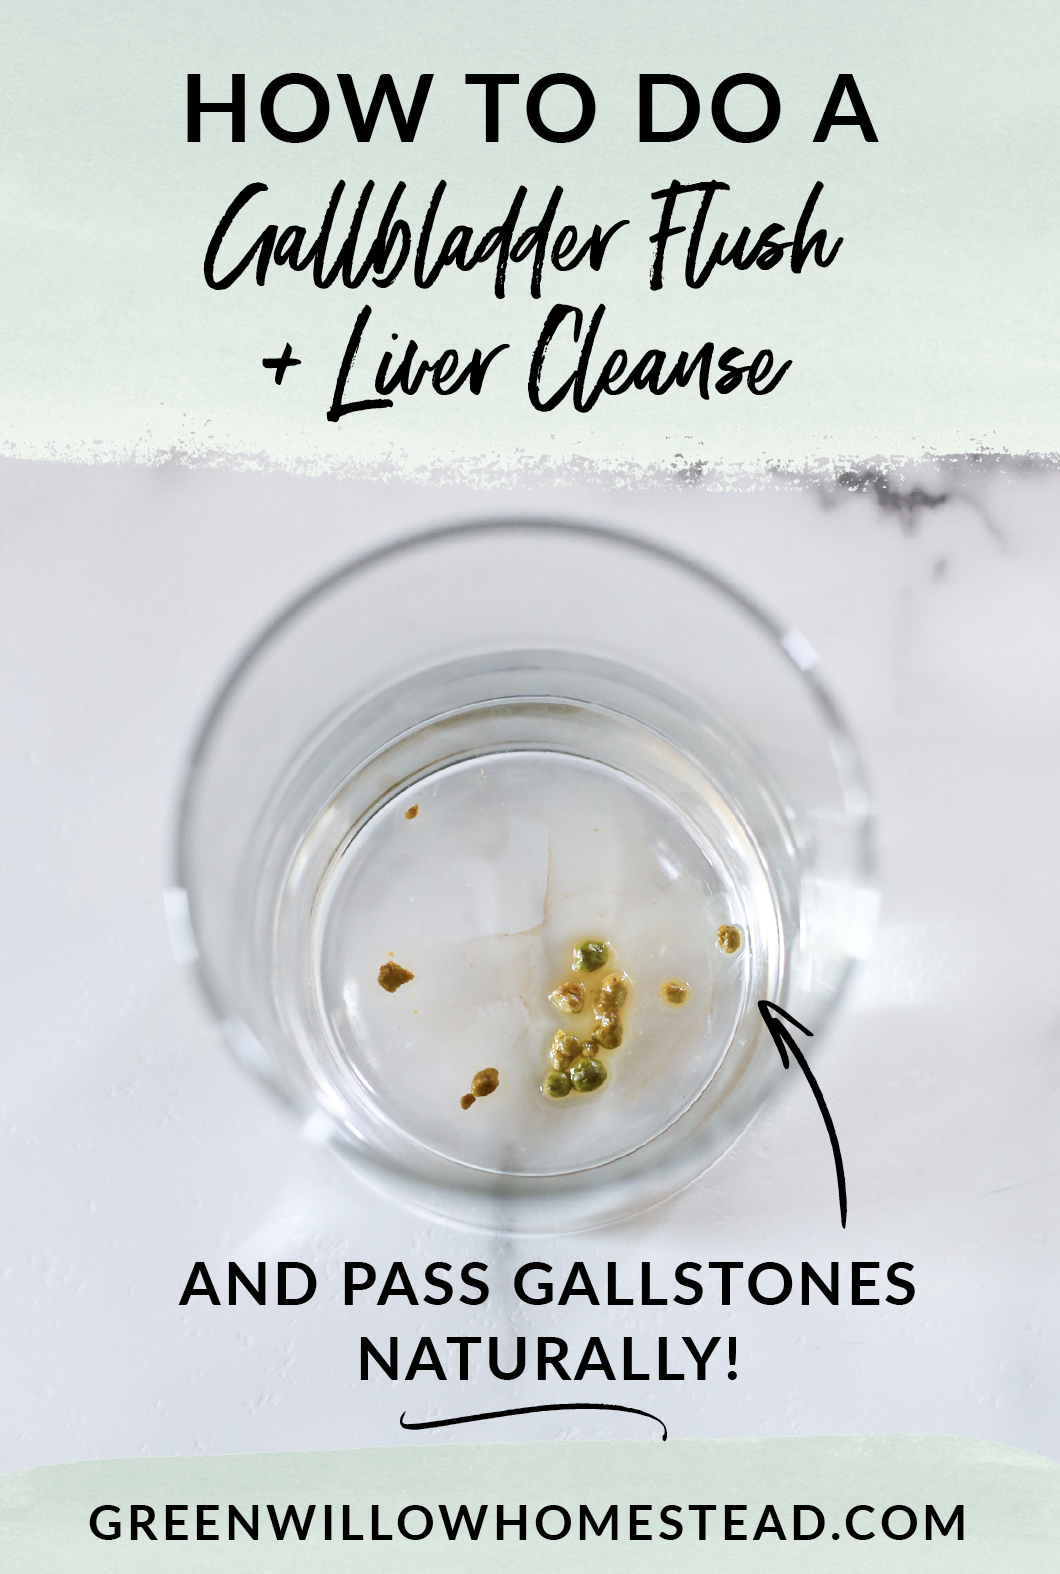 Pass gallstones naturally without surgery using the gallbladder flush